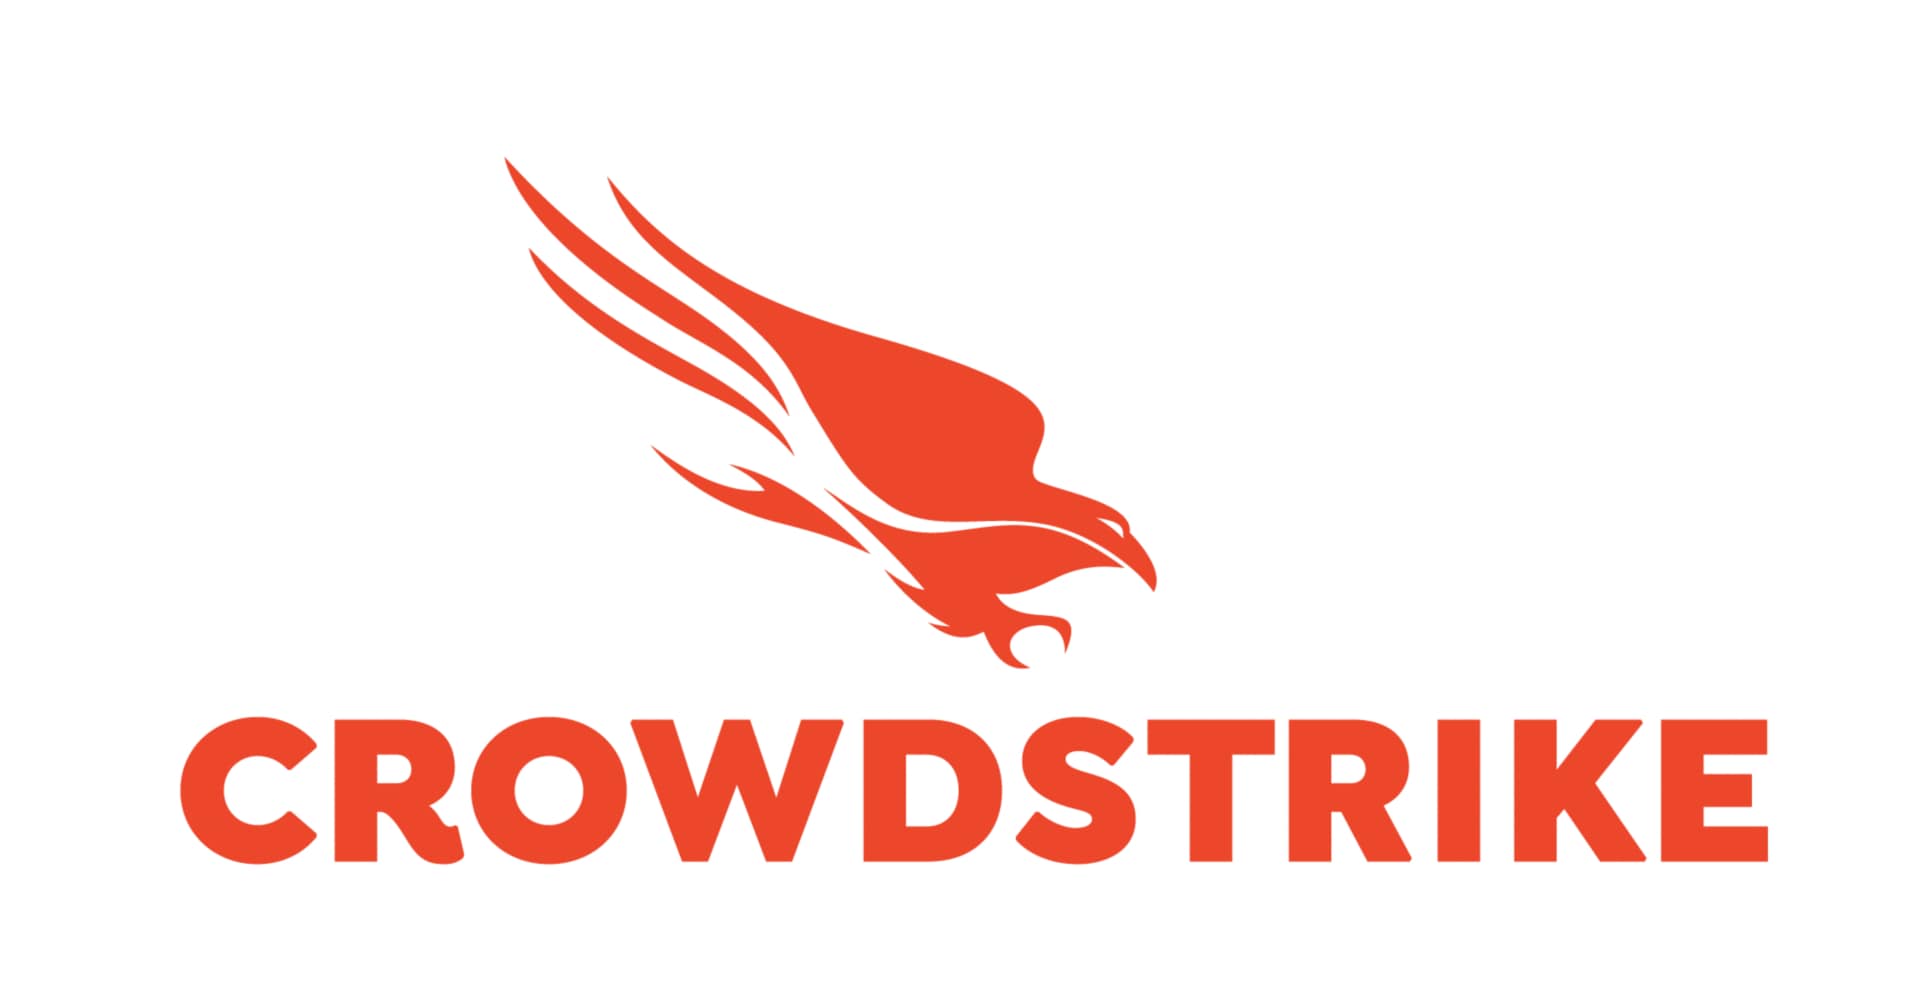 CrowdStrike Humio Cloud for Falcon 365 Day Retention Software Subscription